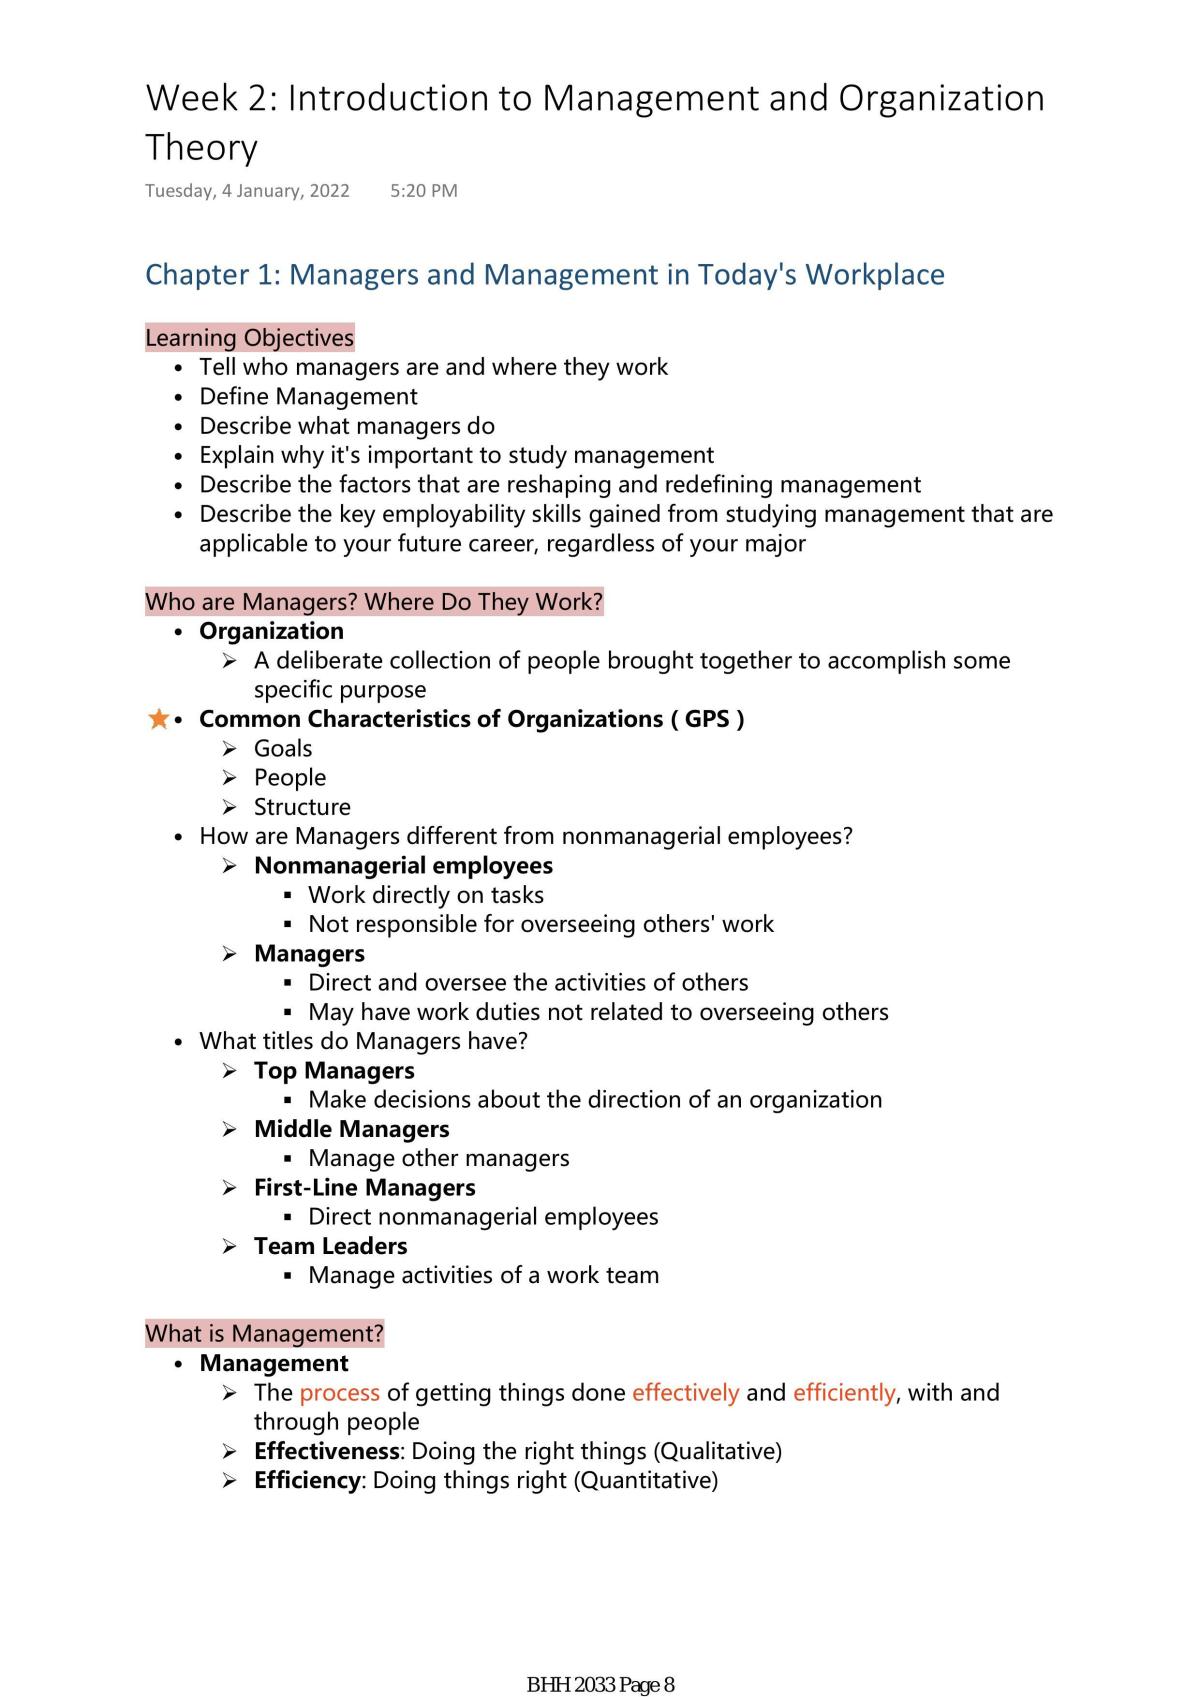 BHH 2033 - Introduction to Management and Organization Theory Study Notes - Page 8